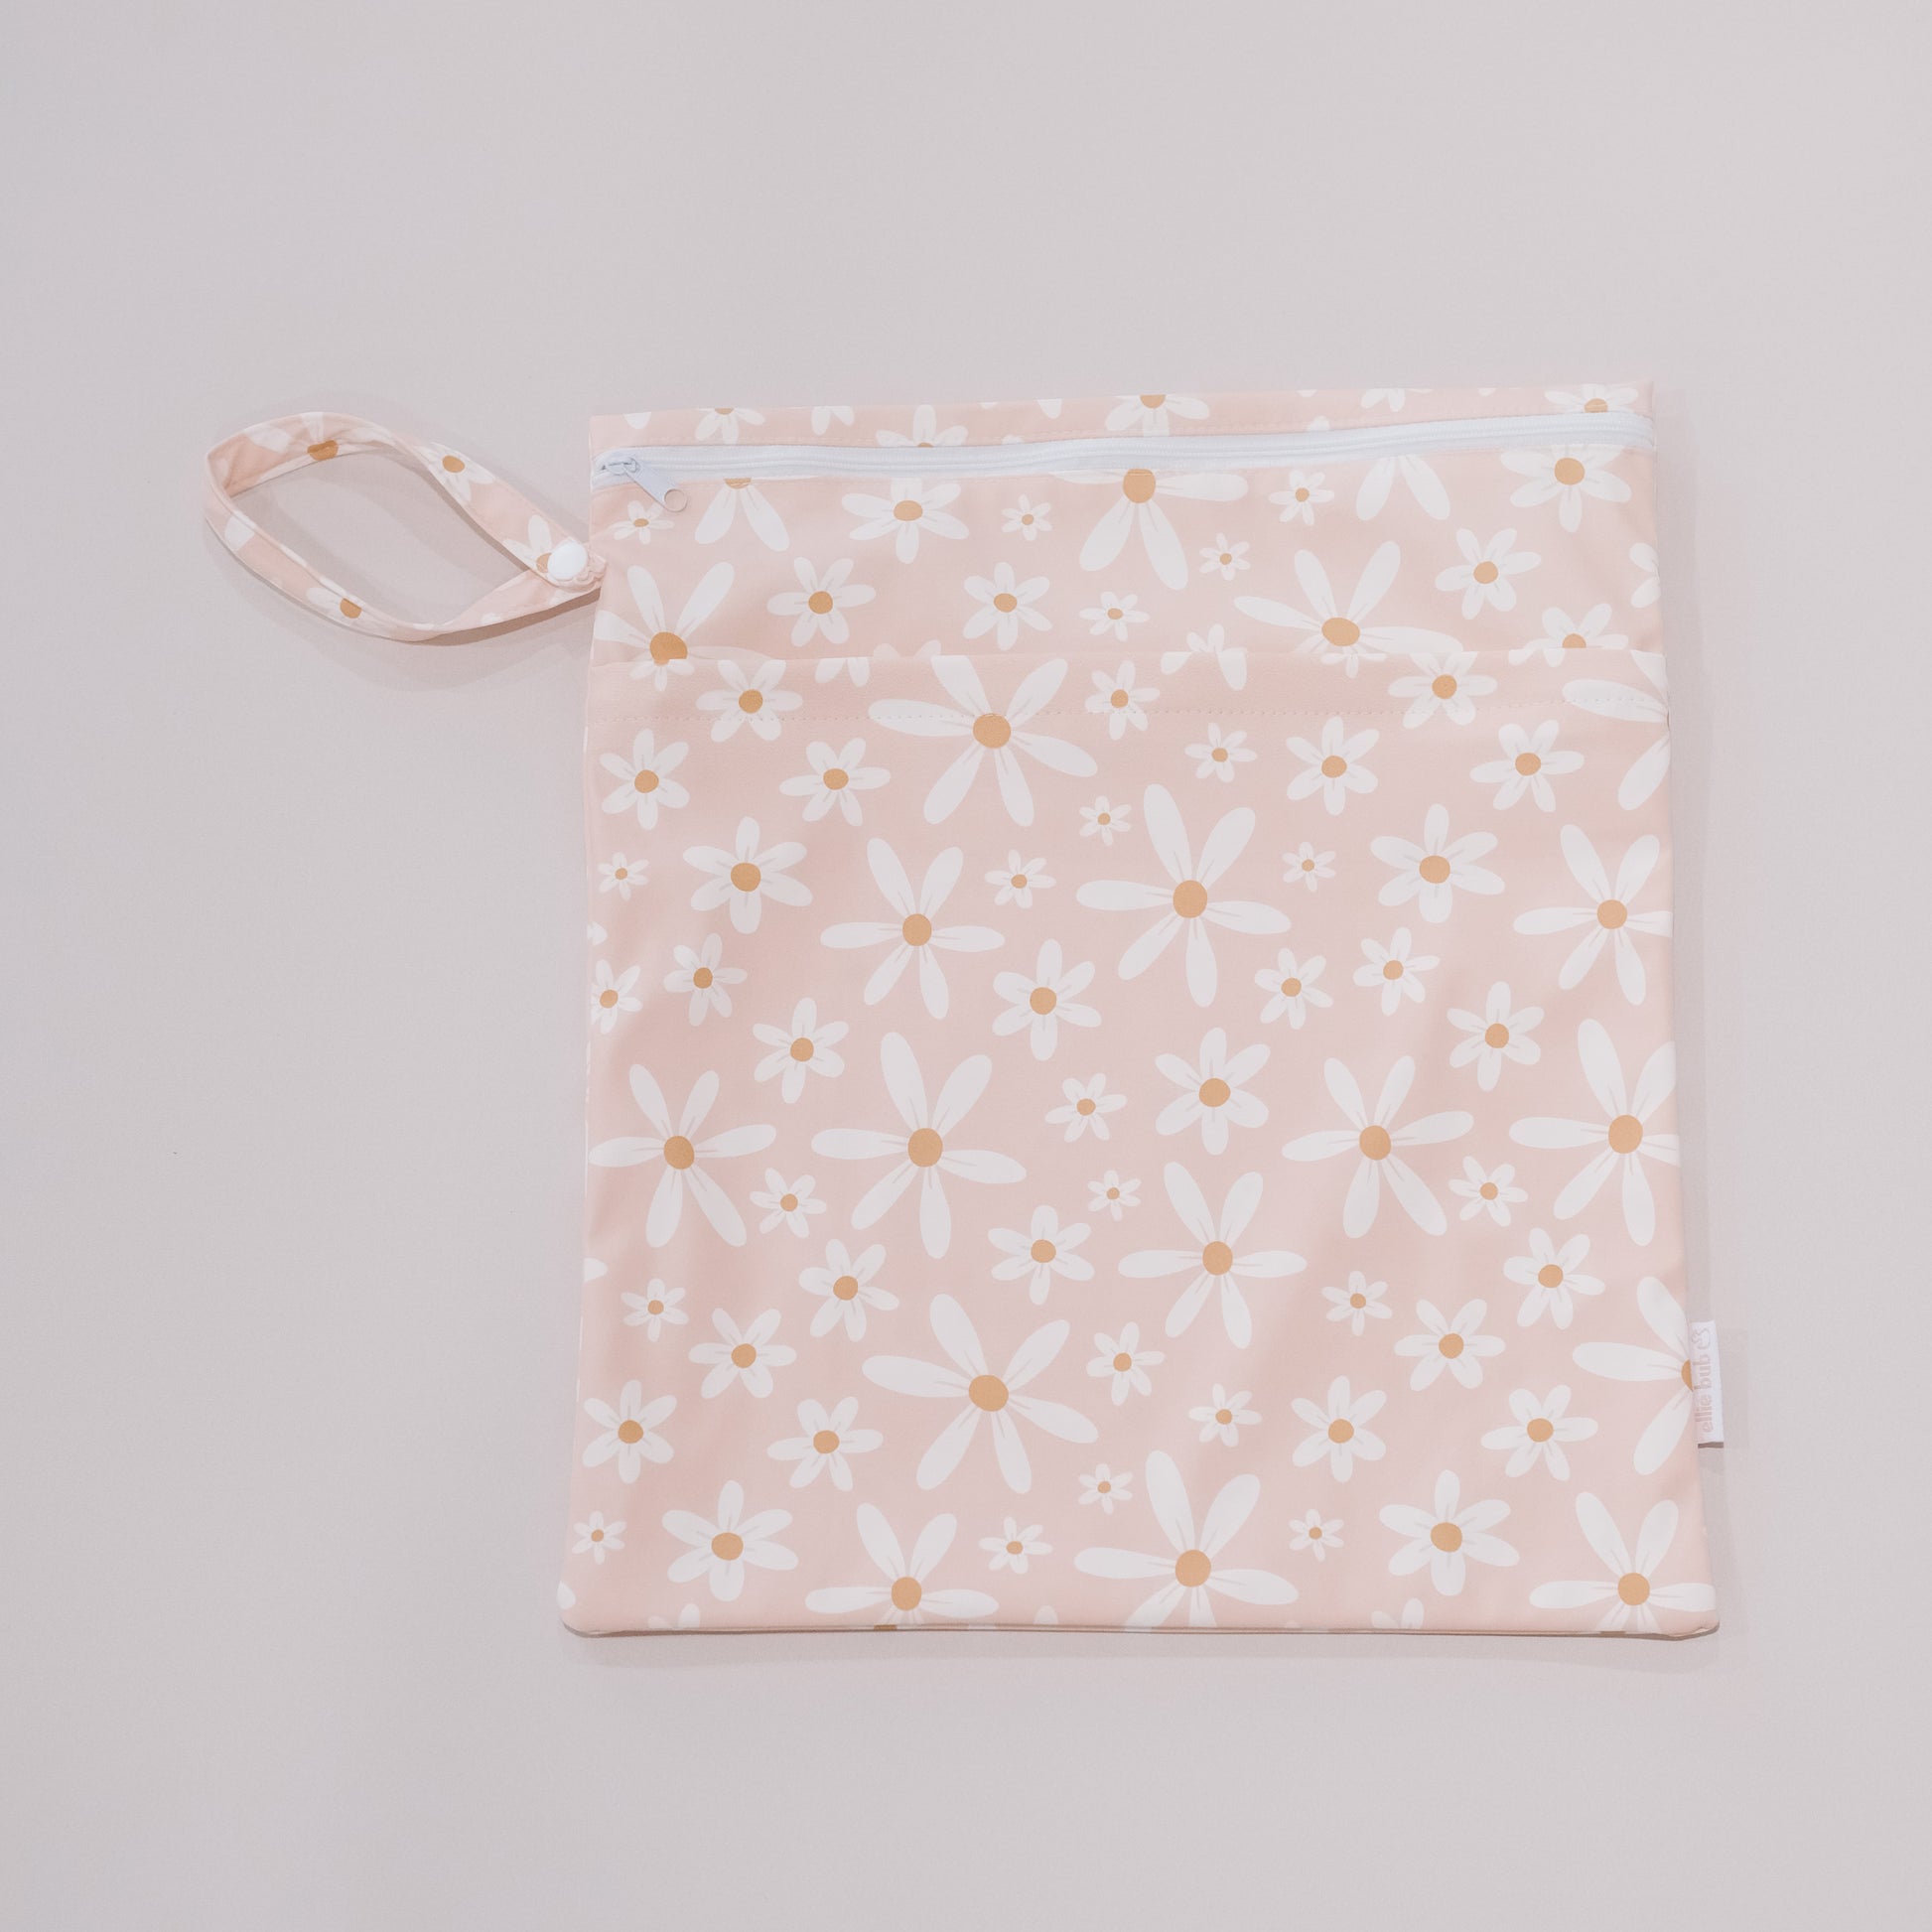 Large Wet bag for swimming daisies full view